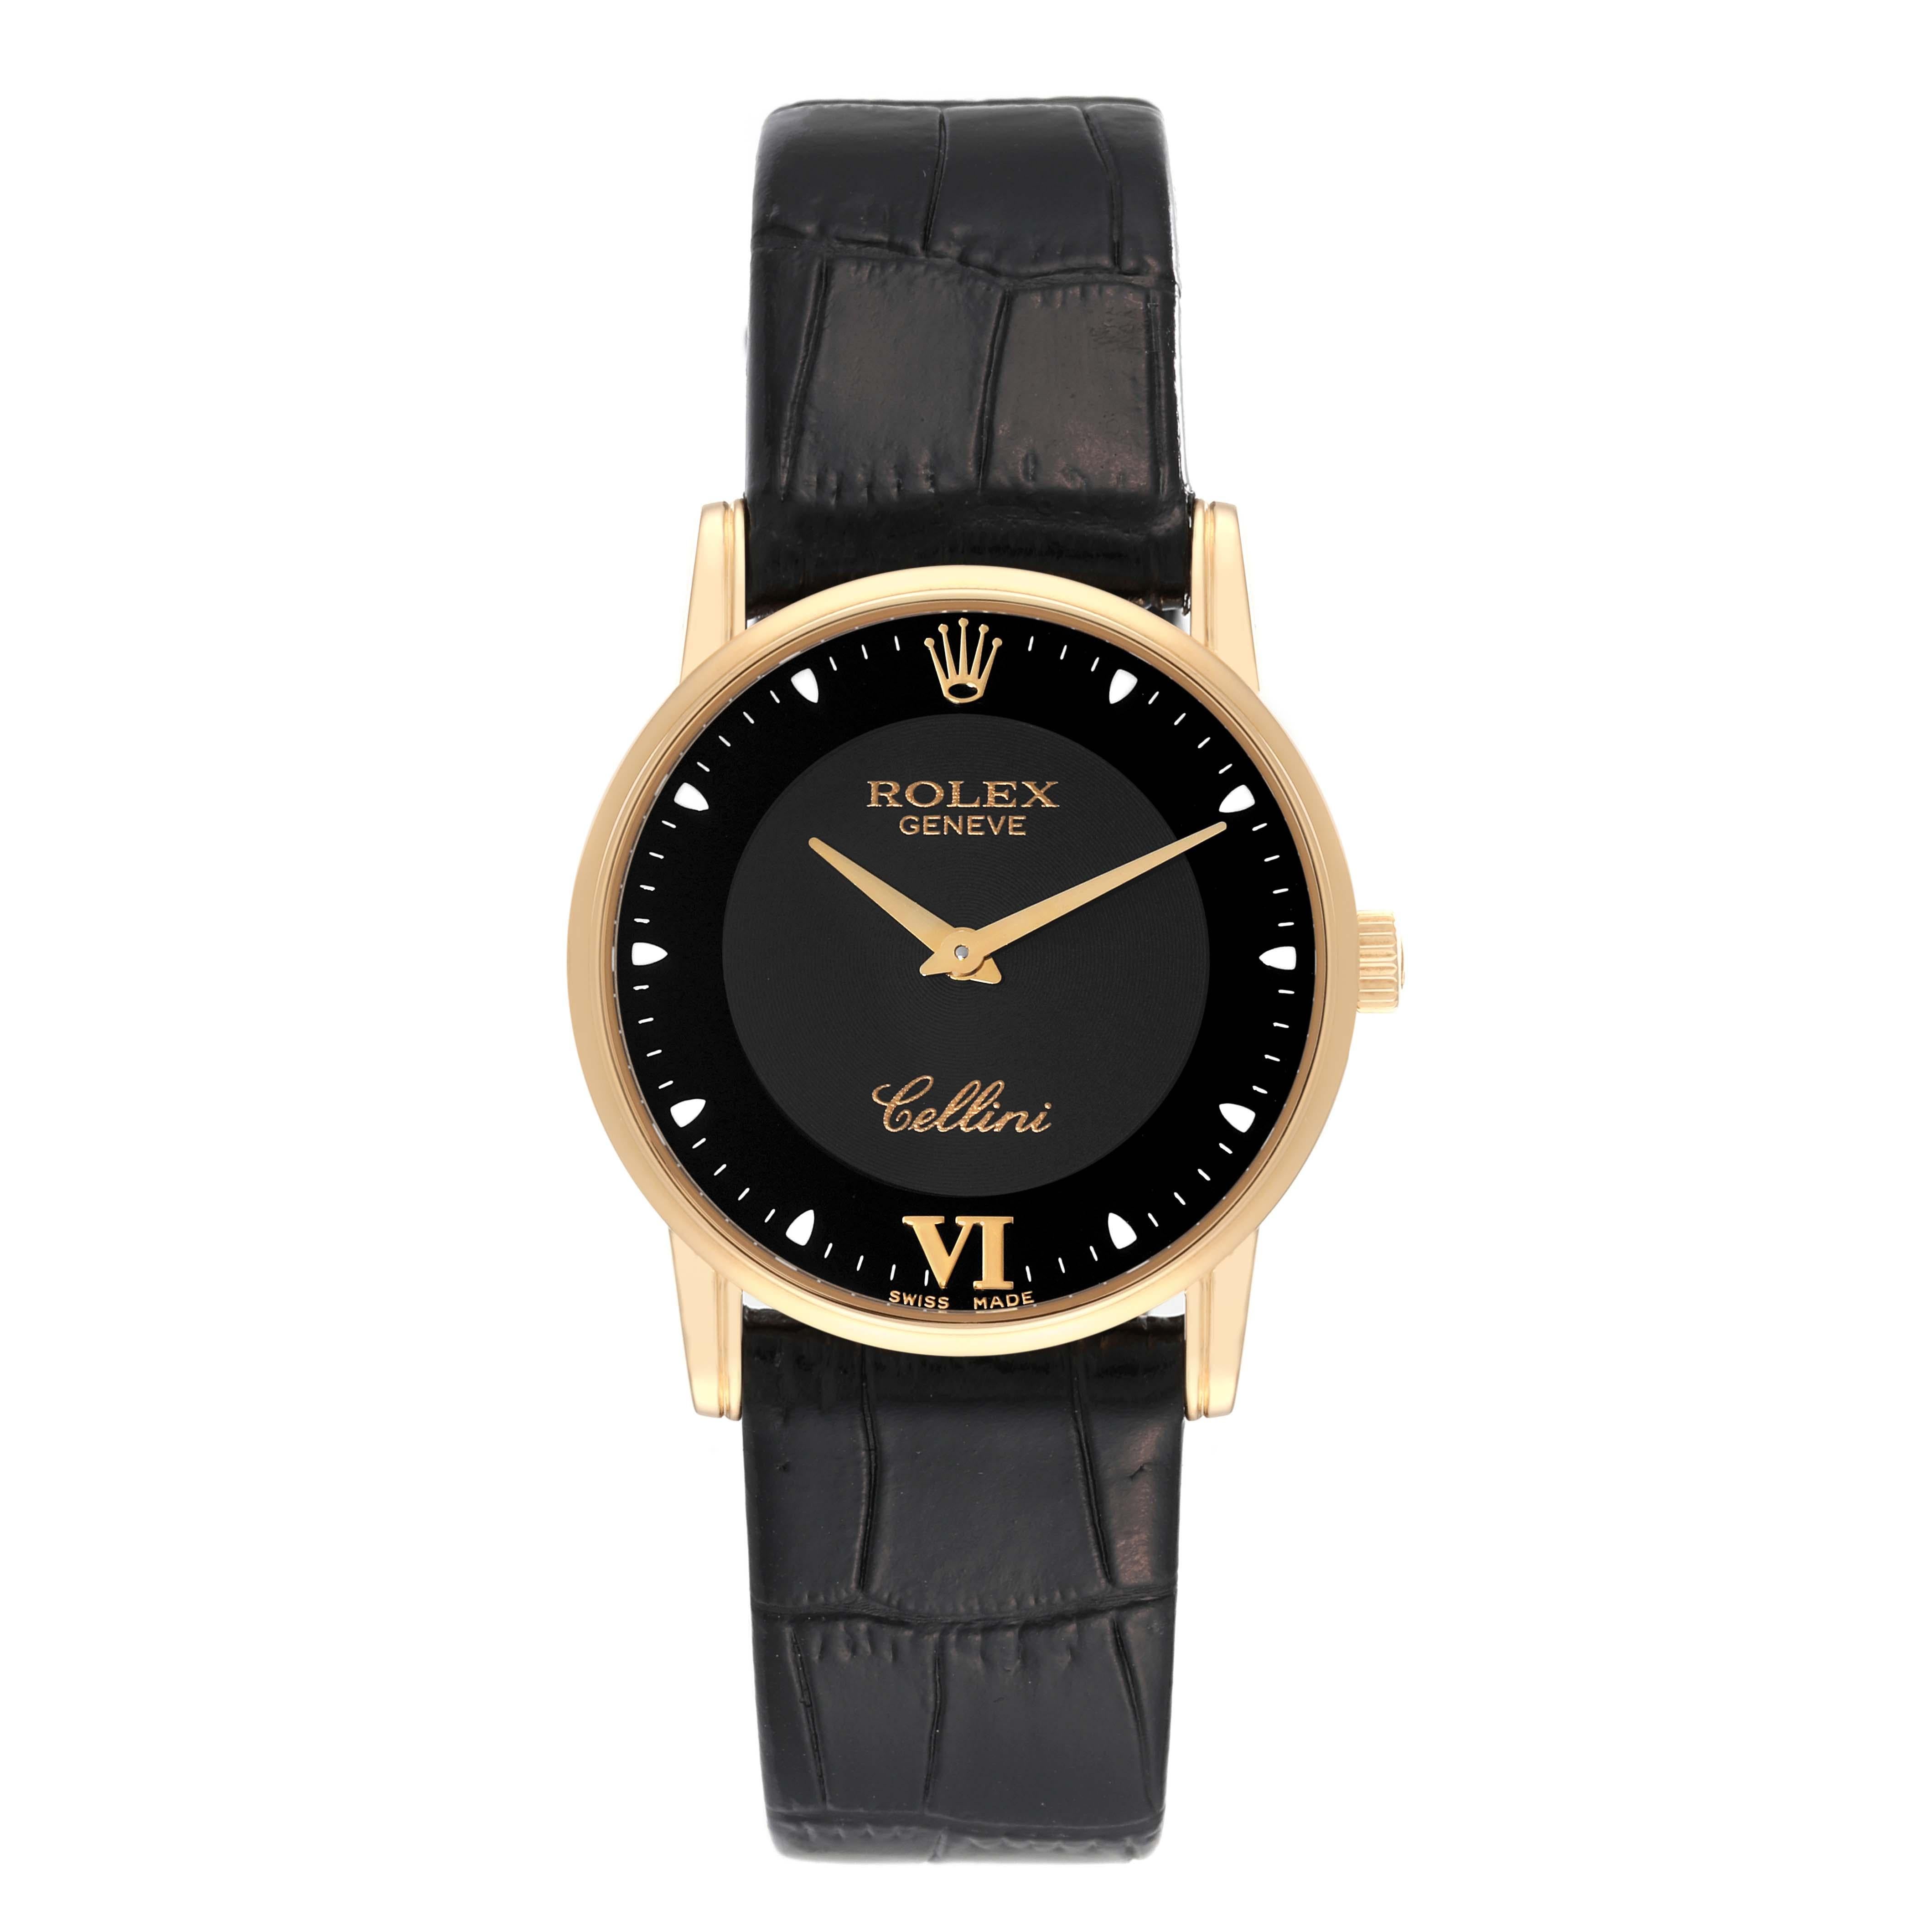 Rolex Cellini Classic Yellow Gold Black Dial Mens Watch 5116. Manual winding movement. 18k yellow gold slim case 31.8 x 5.5 mm in diameter. Rolex logo on a crown. . Scratch resistant sapphire crystal. Flat profile. Black dial with white hour markers